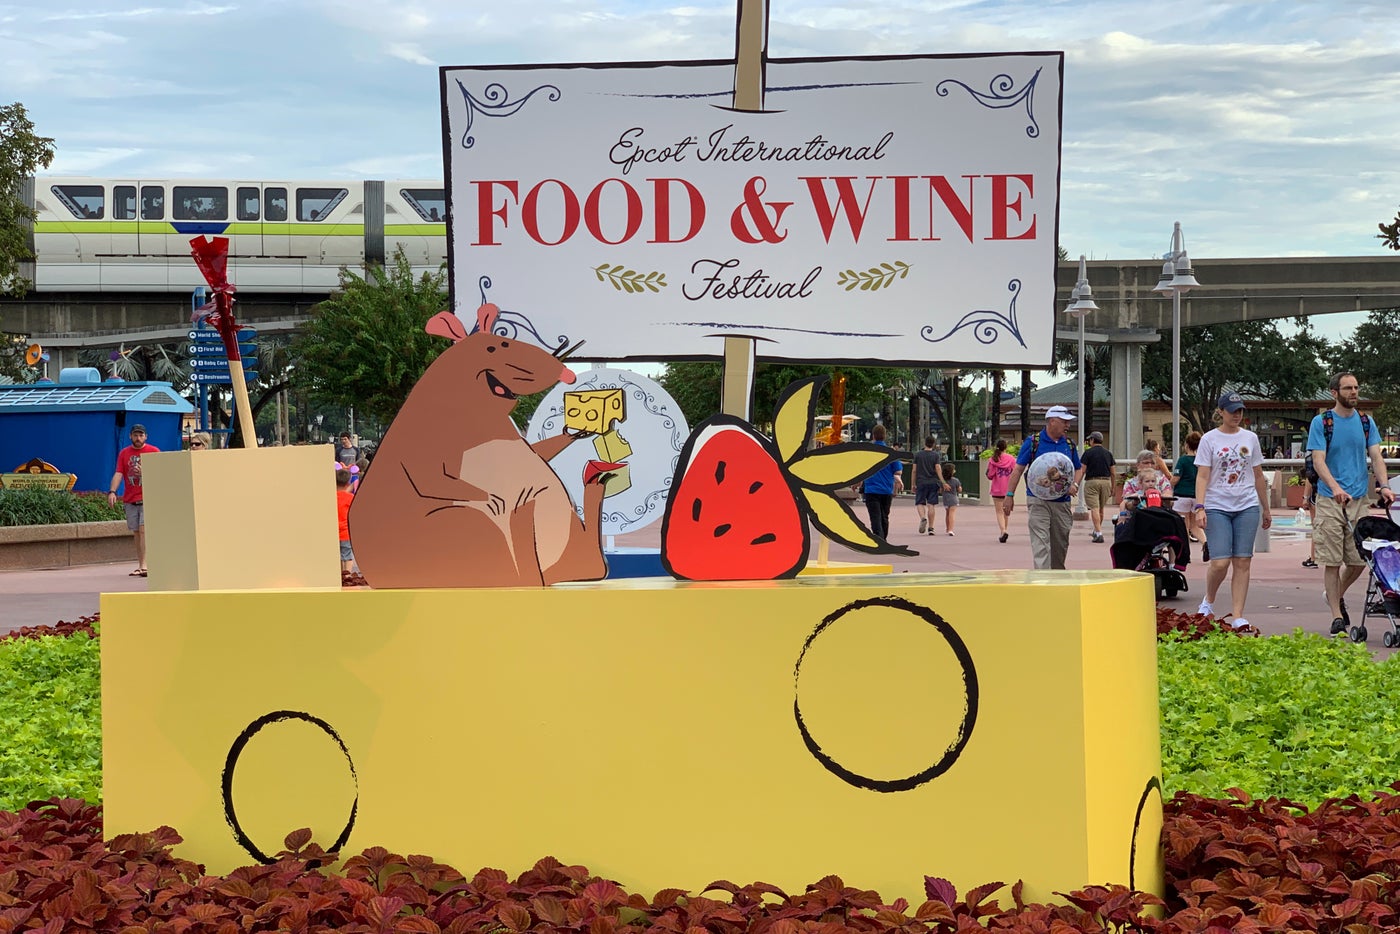 Top tips to make the most of Epcot's International Food and Wine Festival